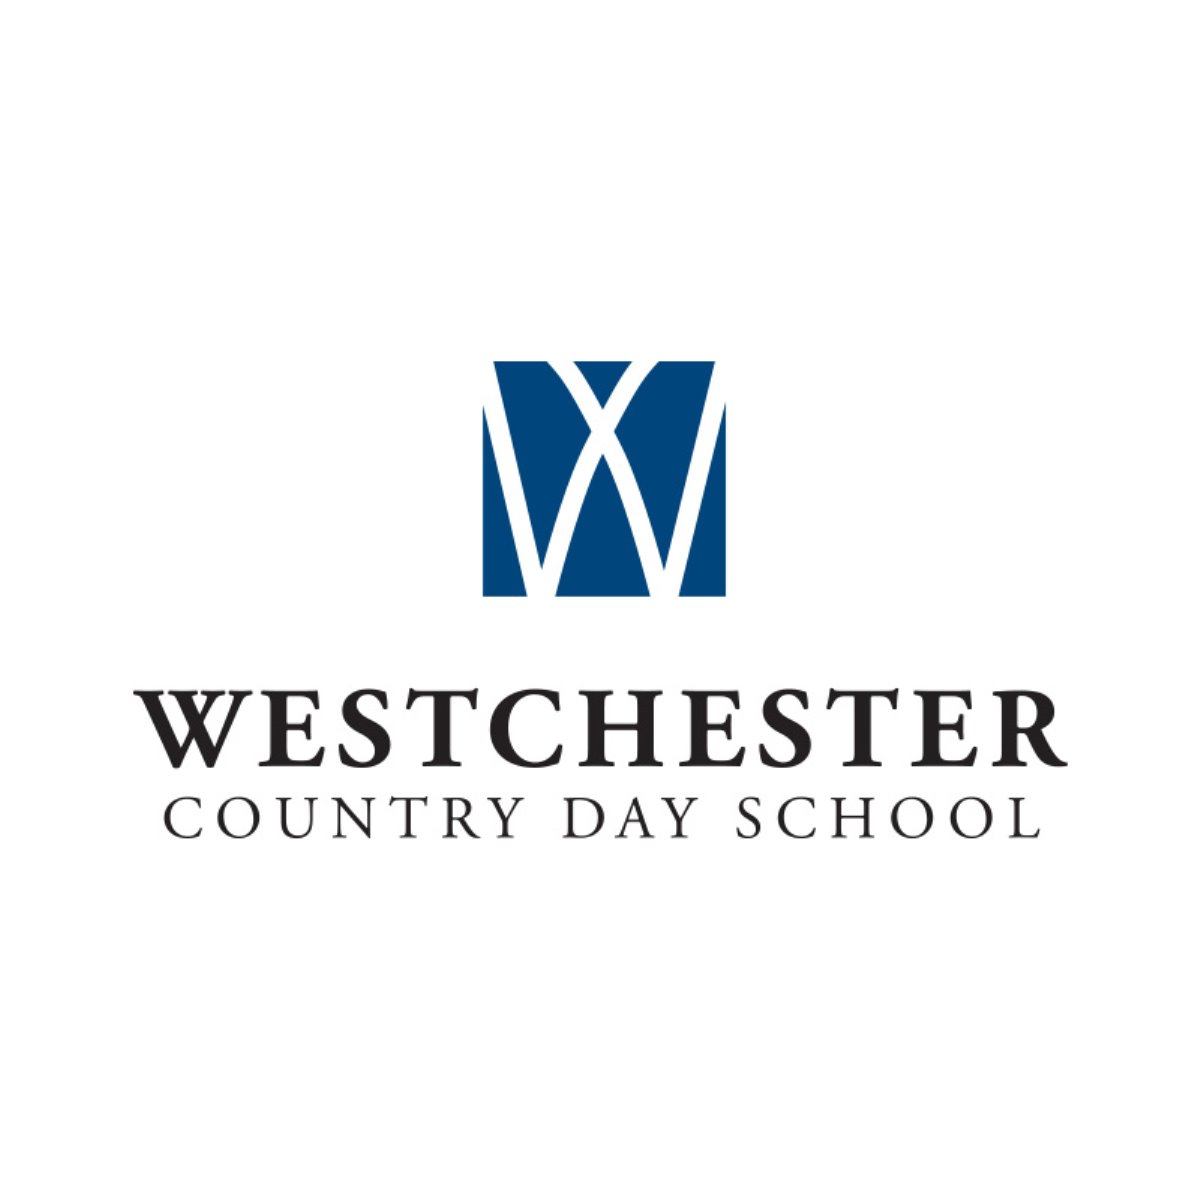 Westchester Country Day School